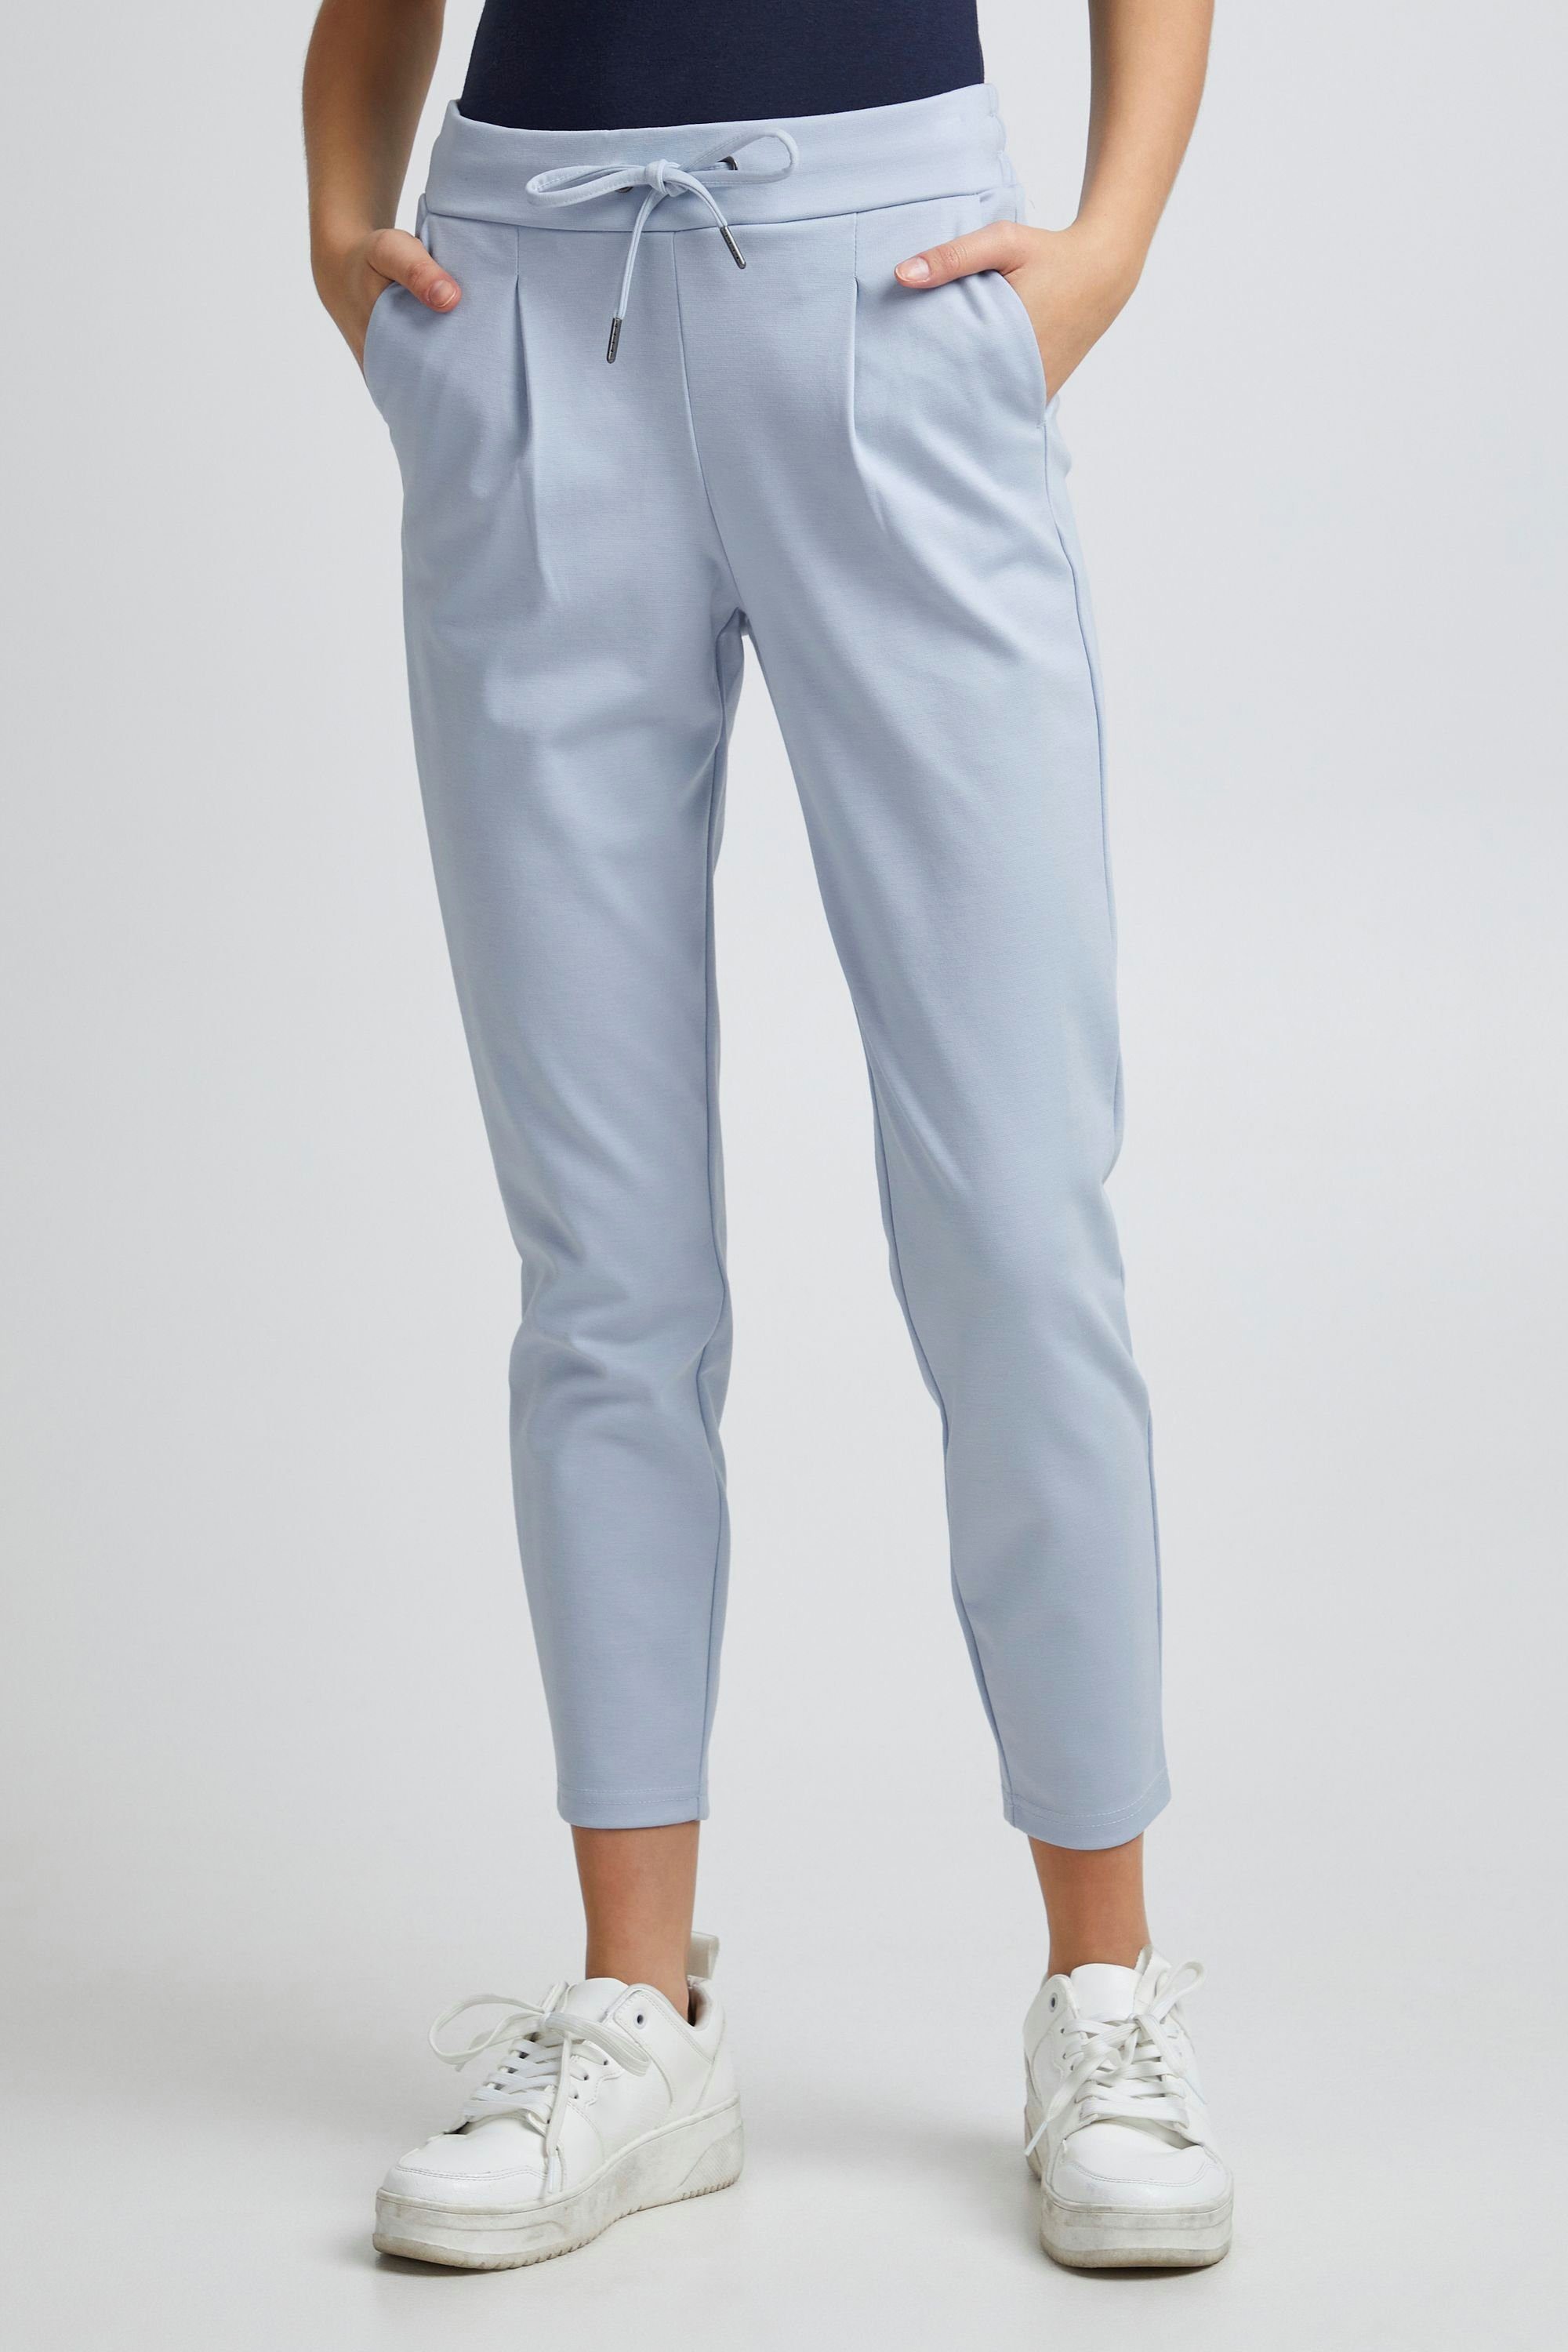 bequemer b.young pants (153915) 20803903 Passform Stoffhose crop BYRizetta Kentucky - Blue Stoffhose mit